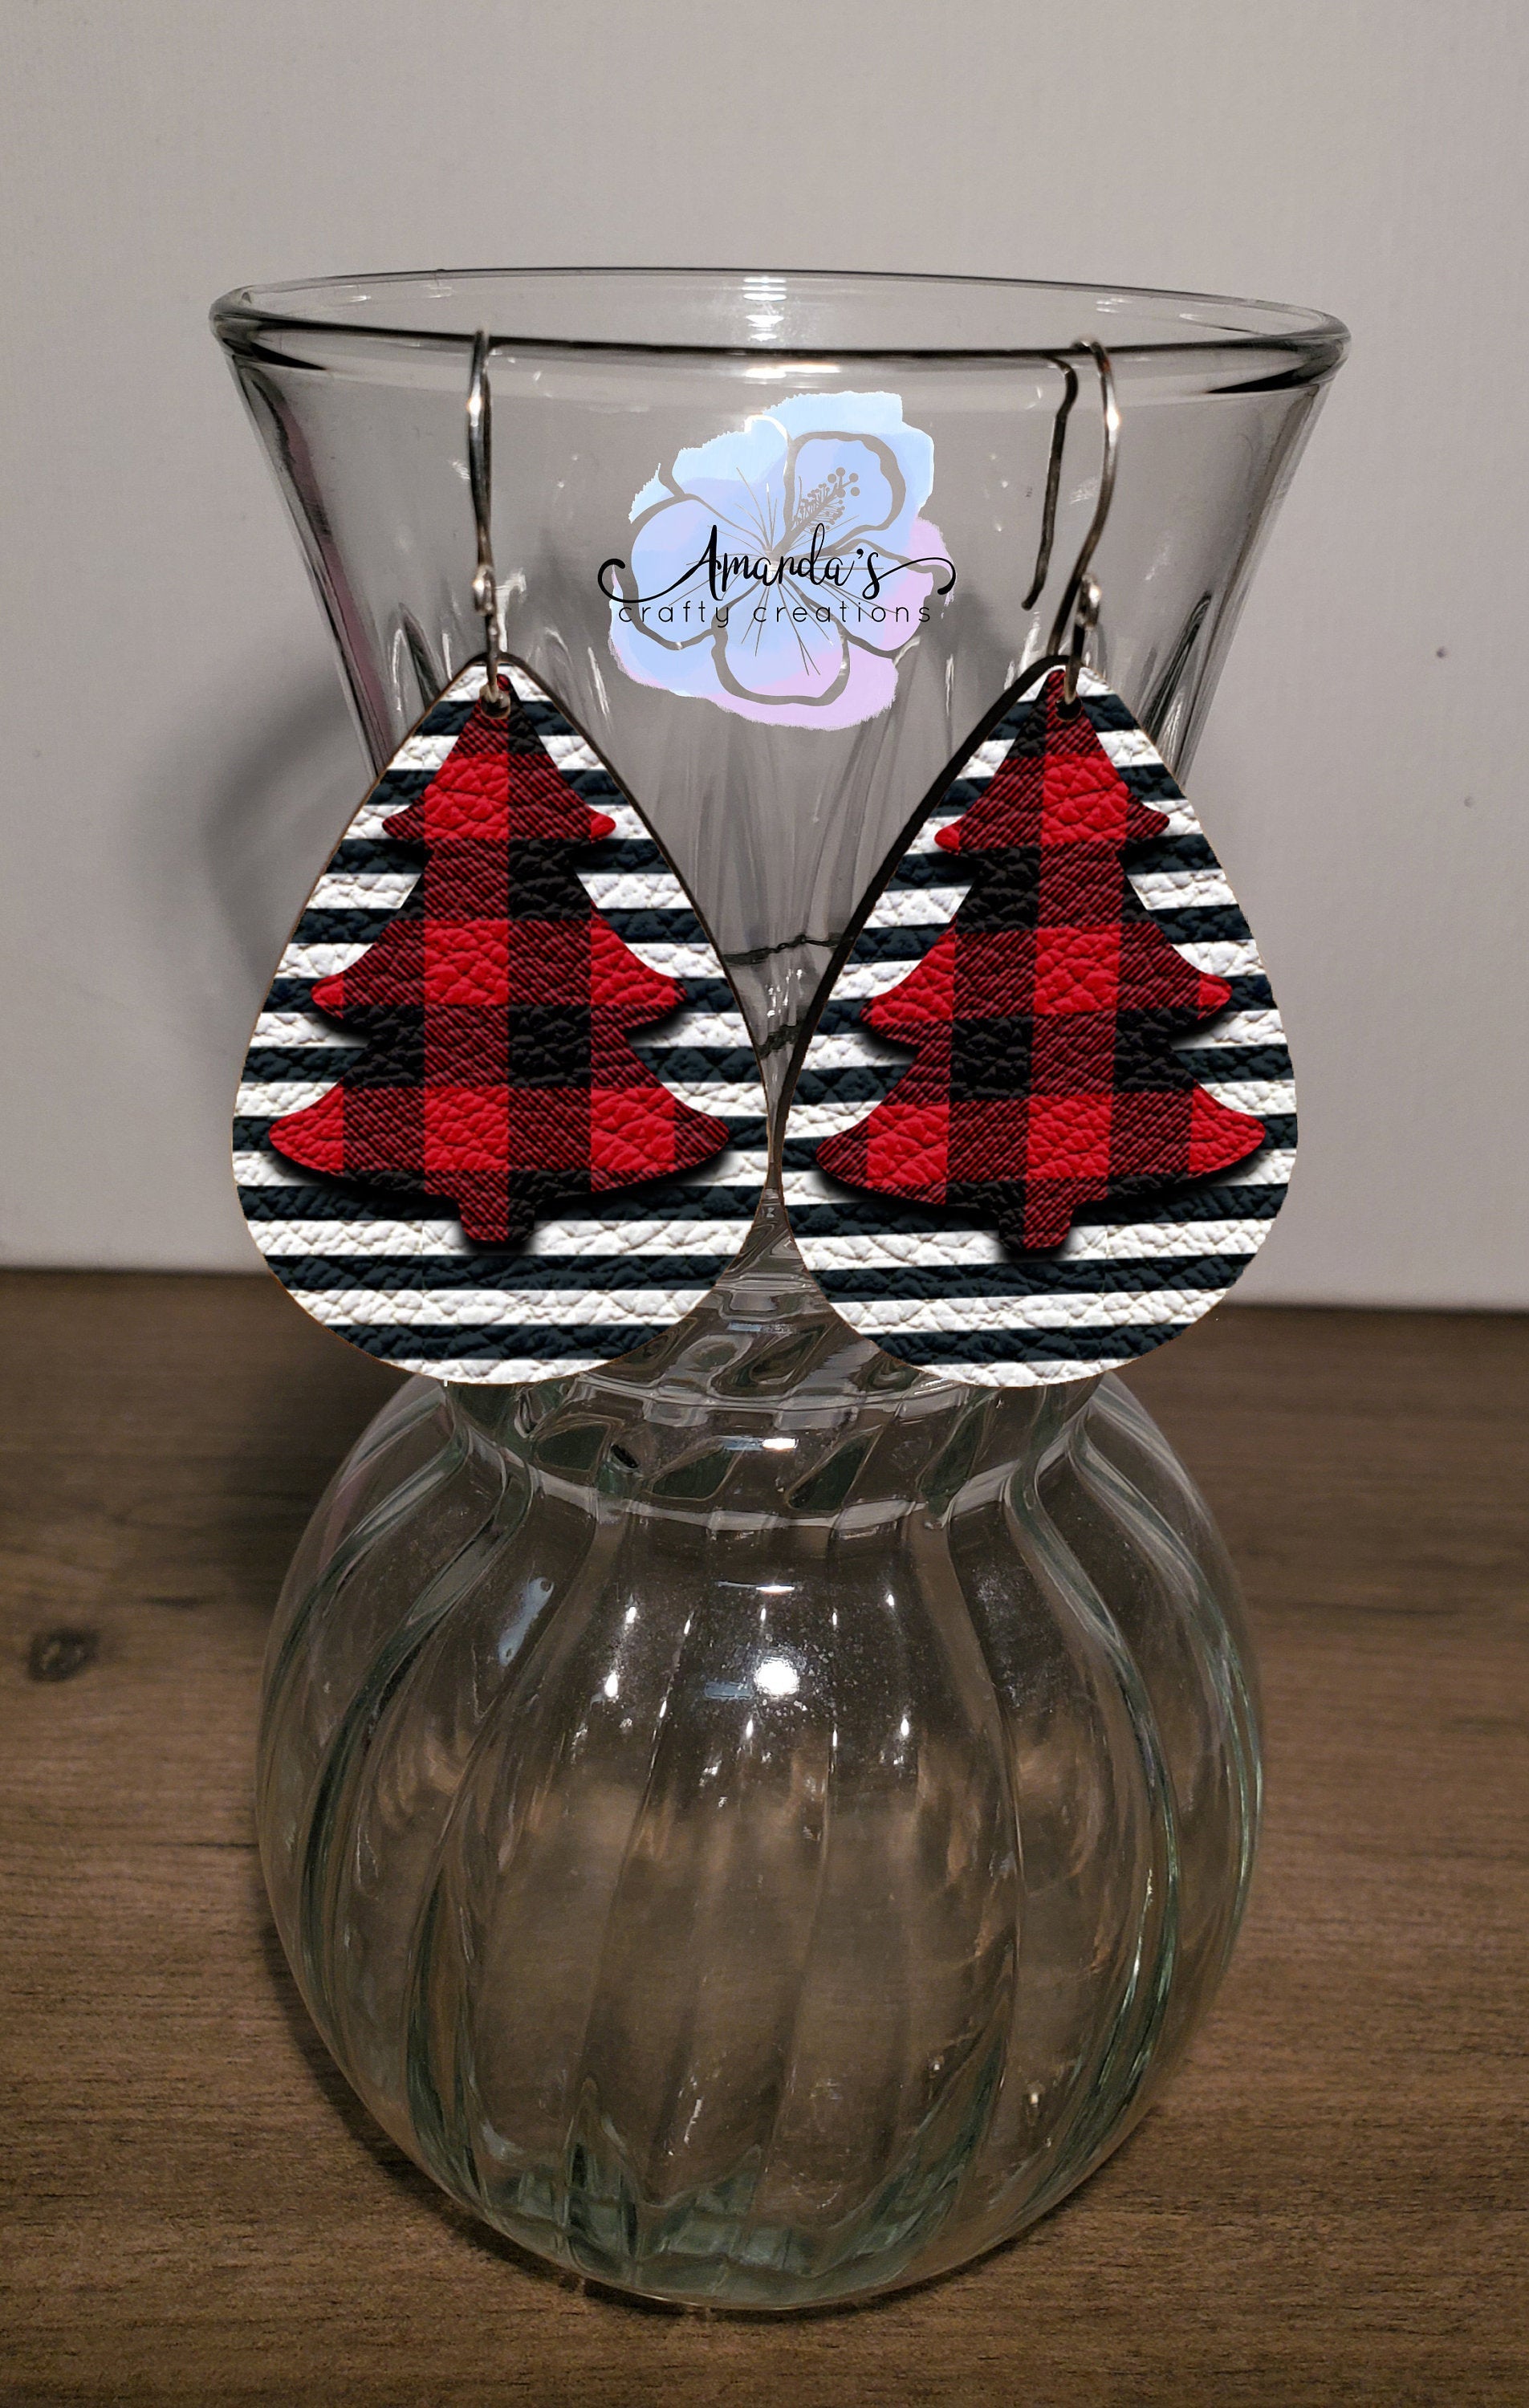 Drop Earrings, black and white stripes with red and black buffalo plaid Christmas tree